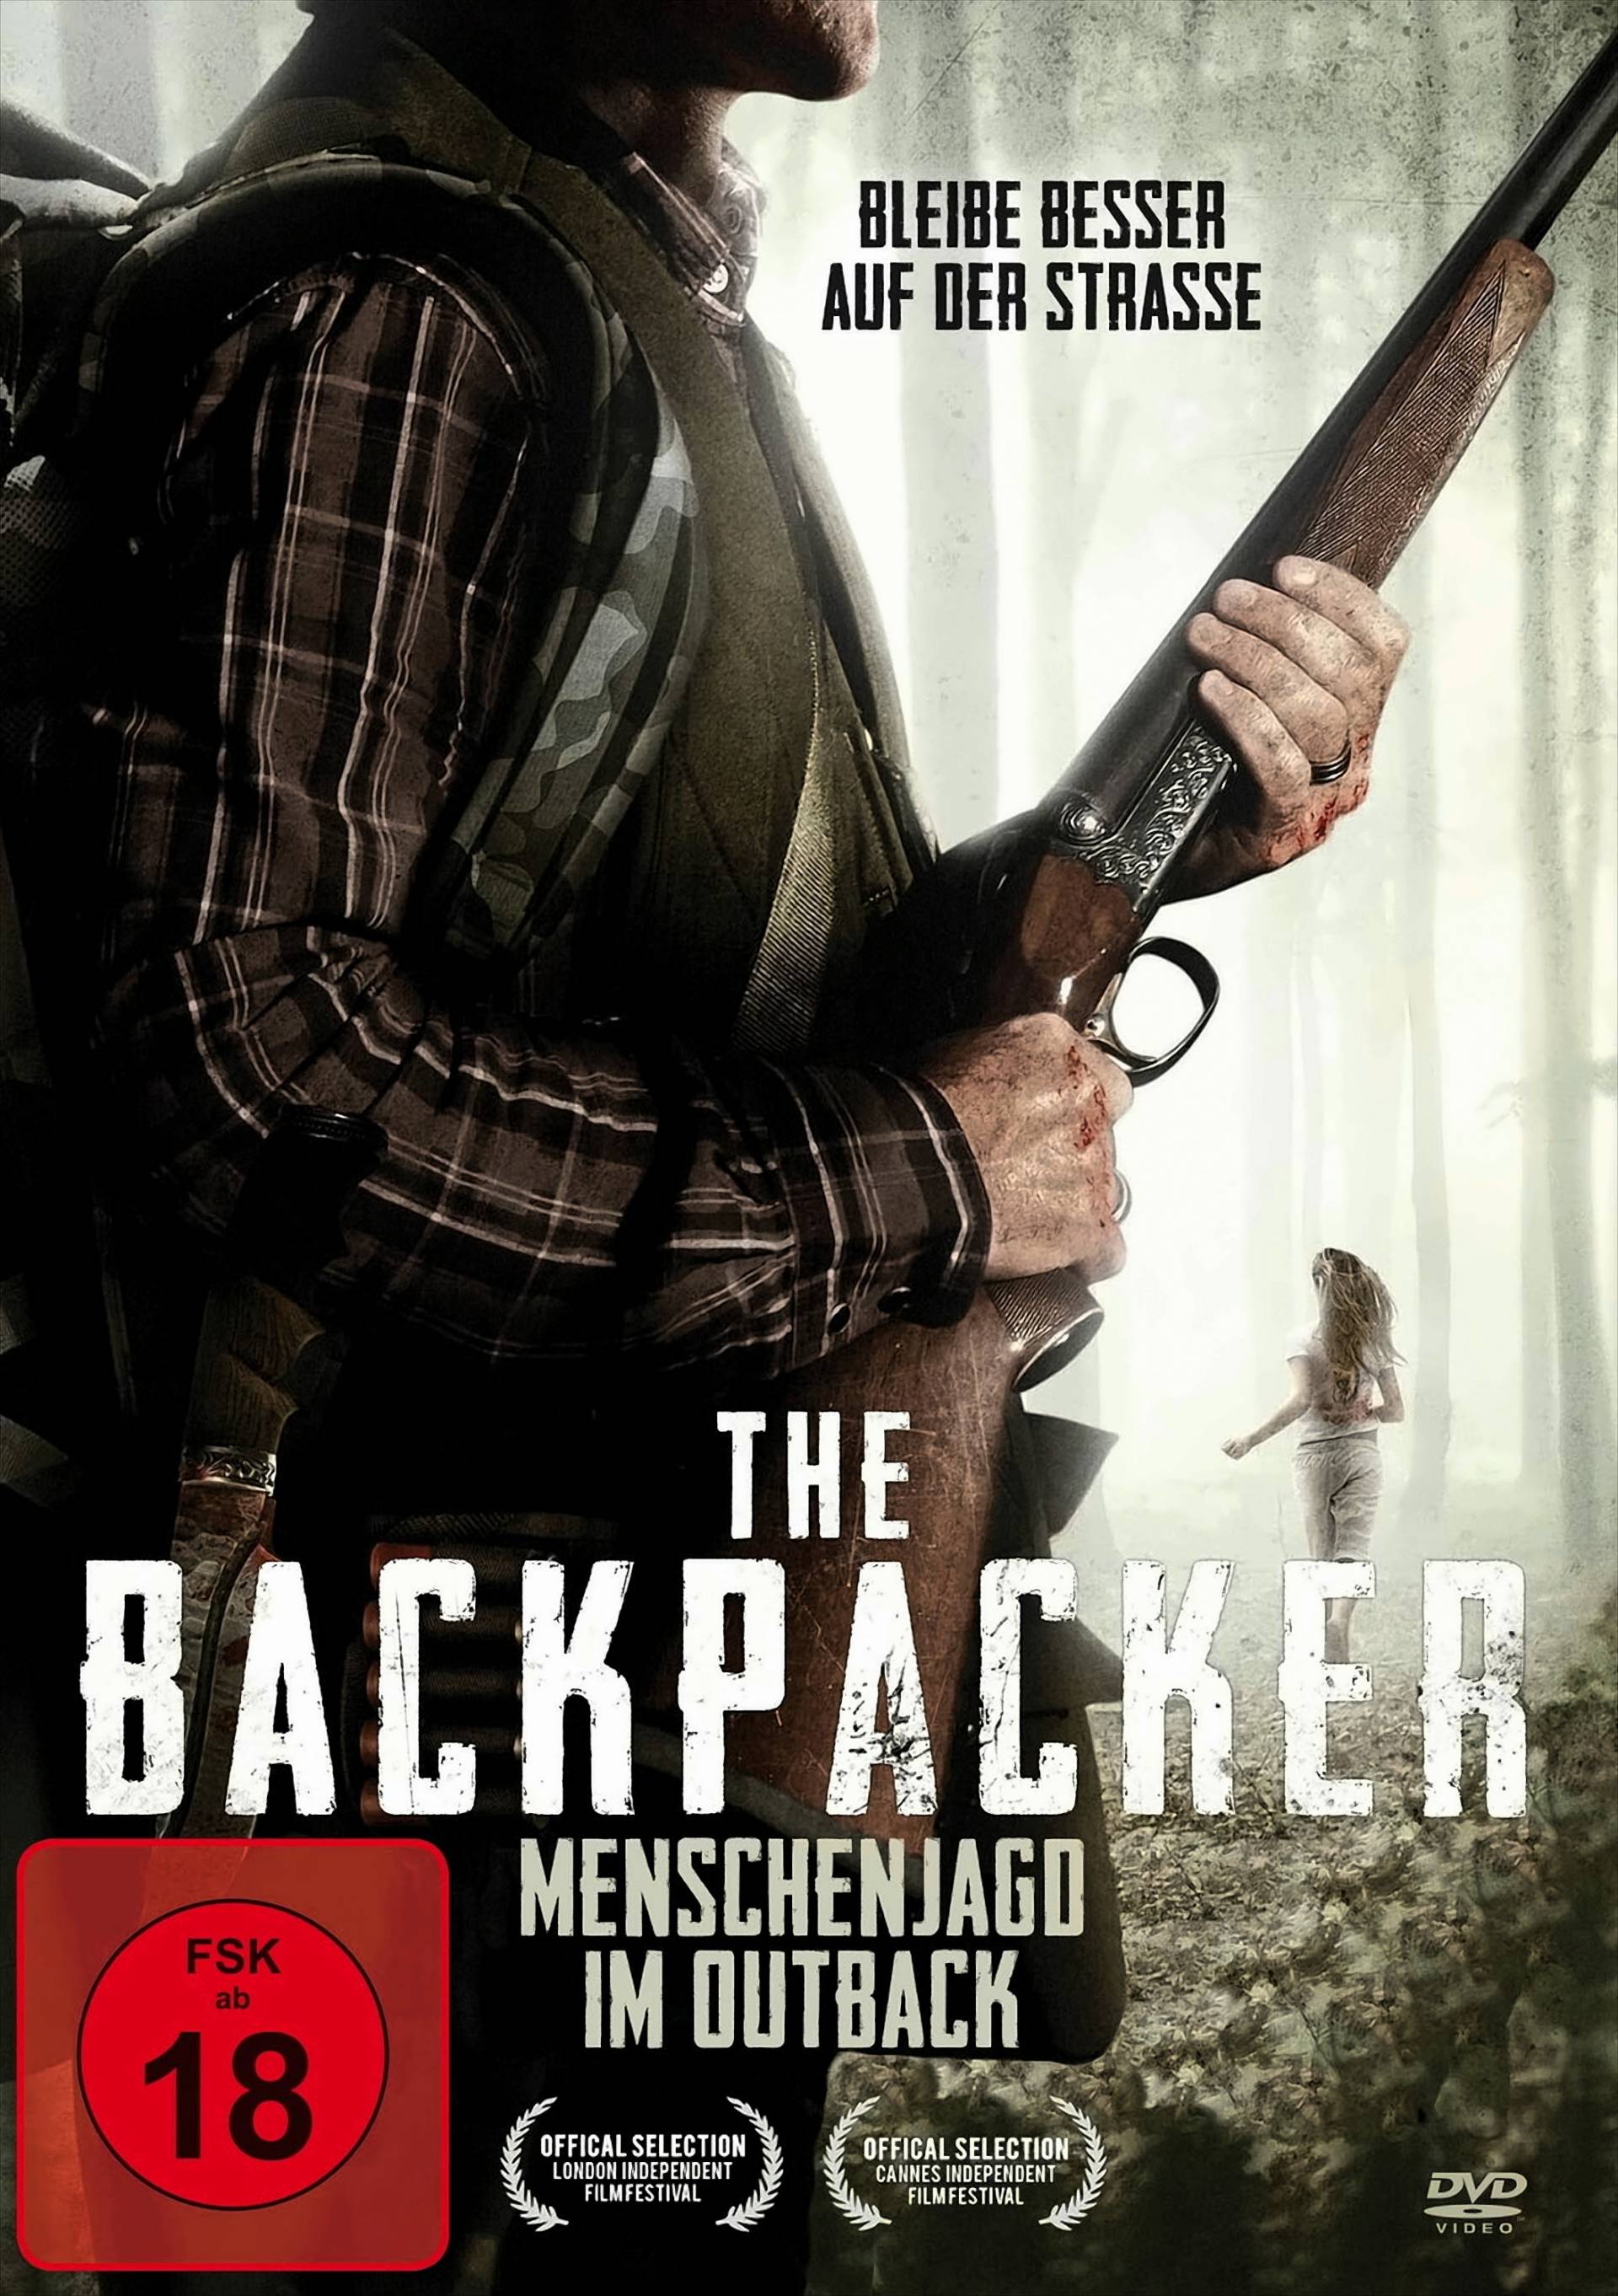 The Backpacker - Menschenjagd im Outback von Lighthouse